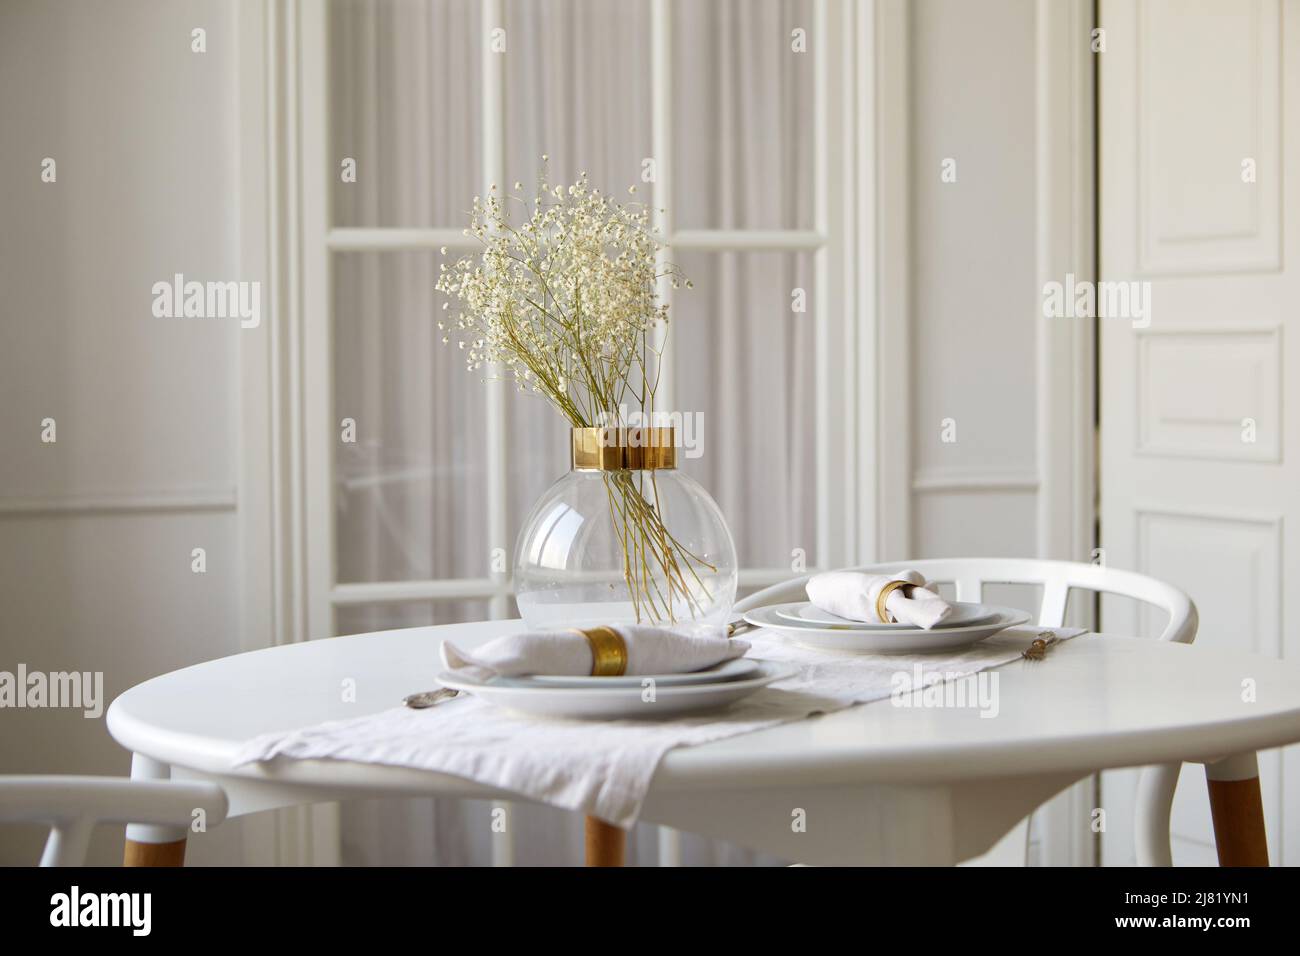 Elegant glass vase with gentle babys breath flowers and ceramic plates with rolled napkins served on round table in white dining room Stock Photo